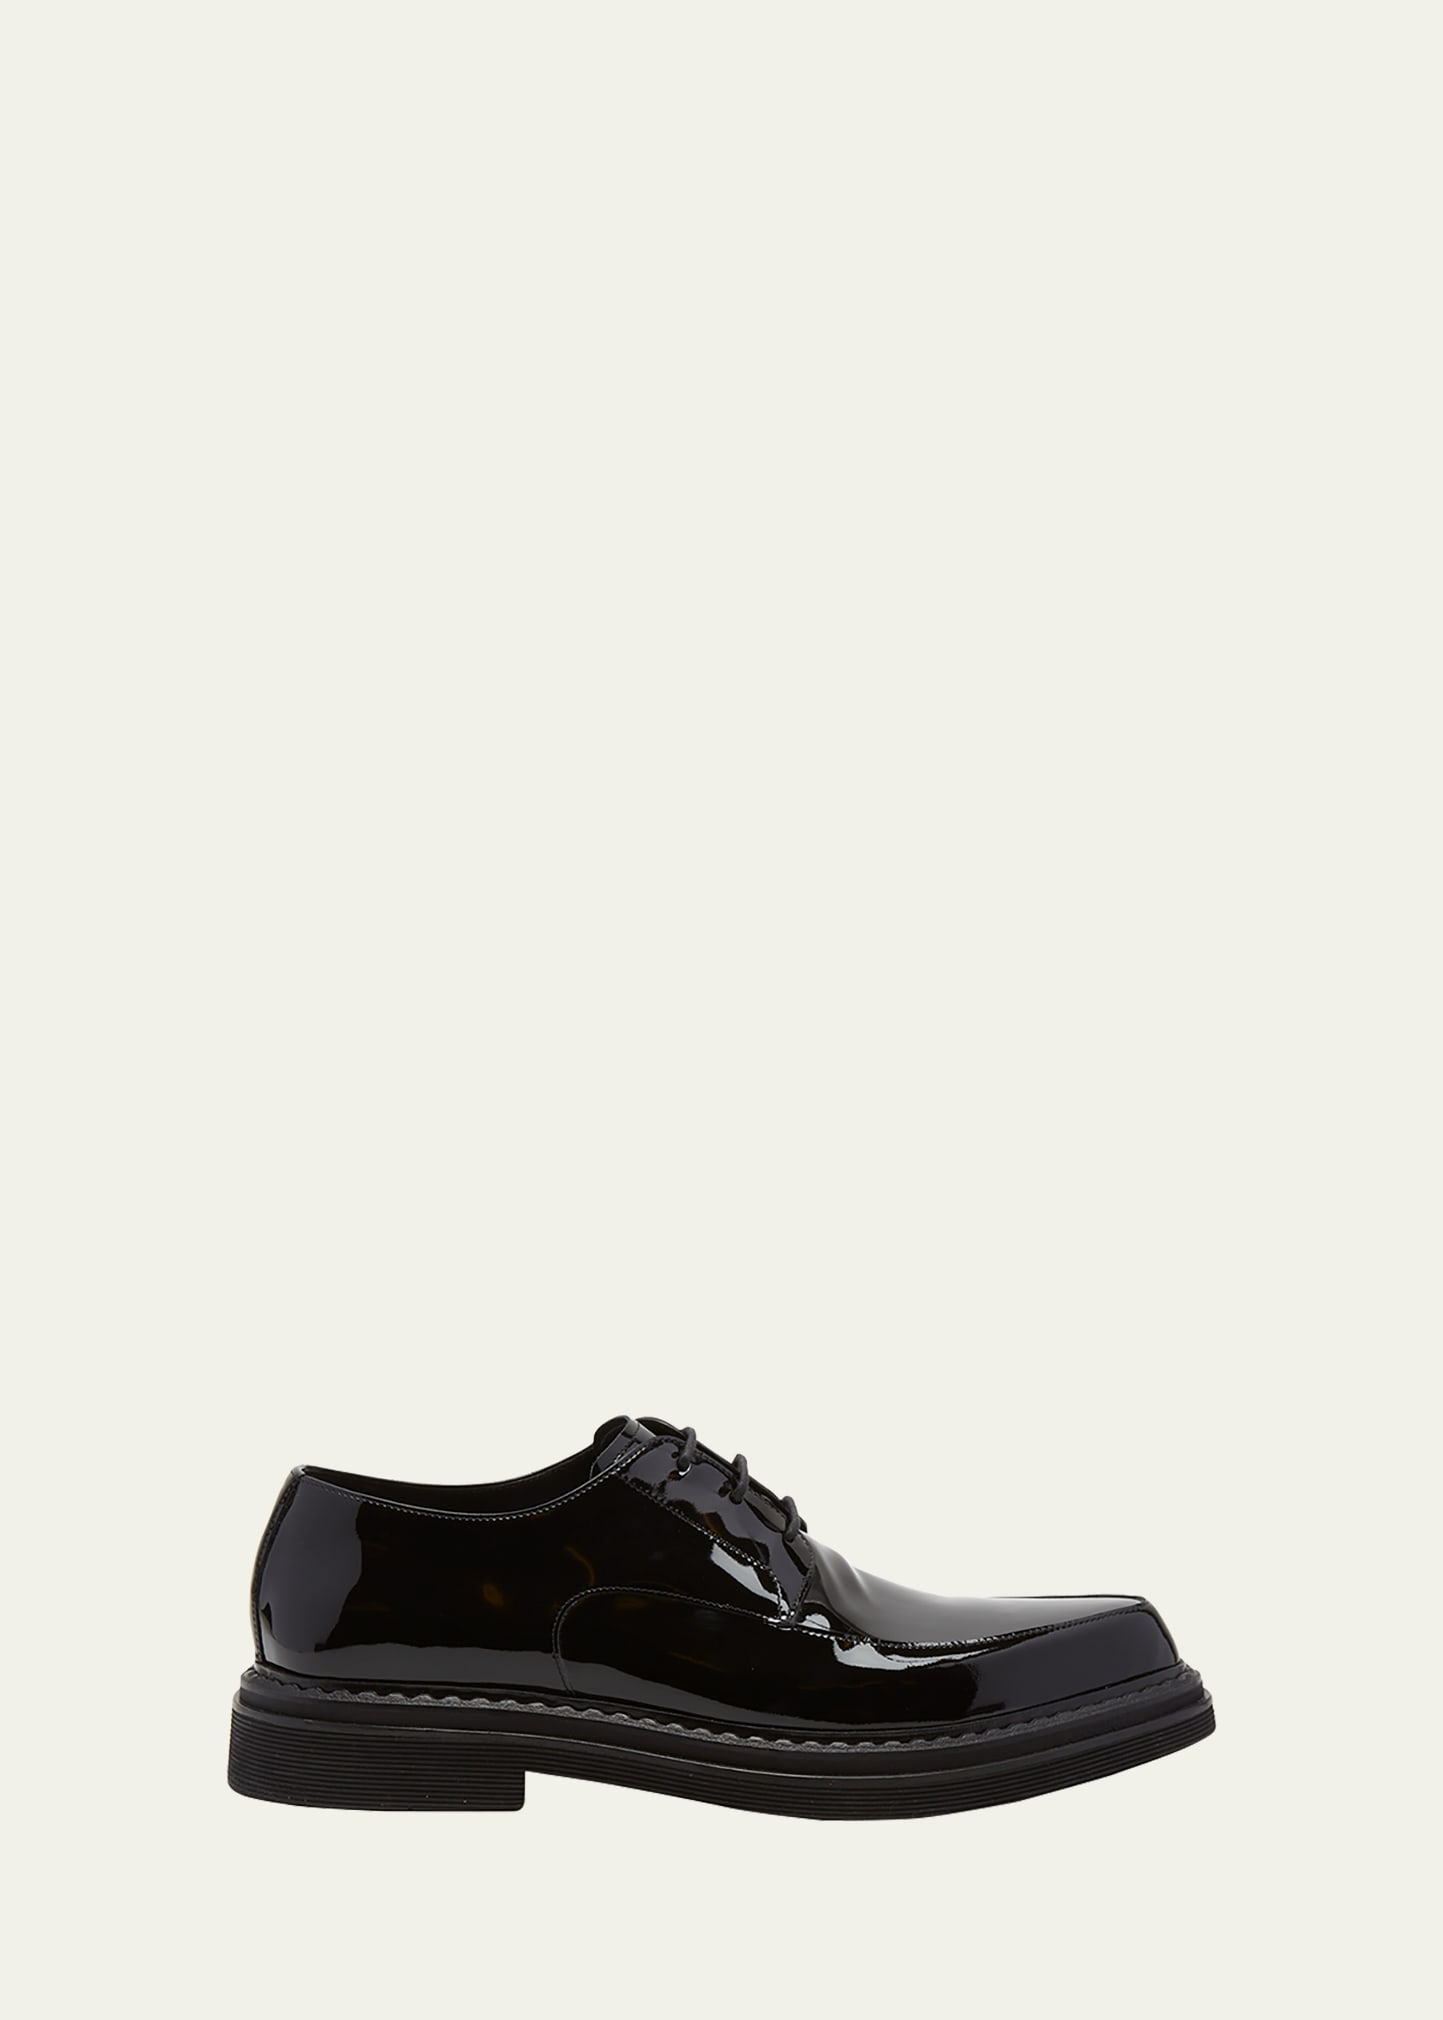 Dolce & Gabbana Men's Patent Leather Derby Shoes In Black